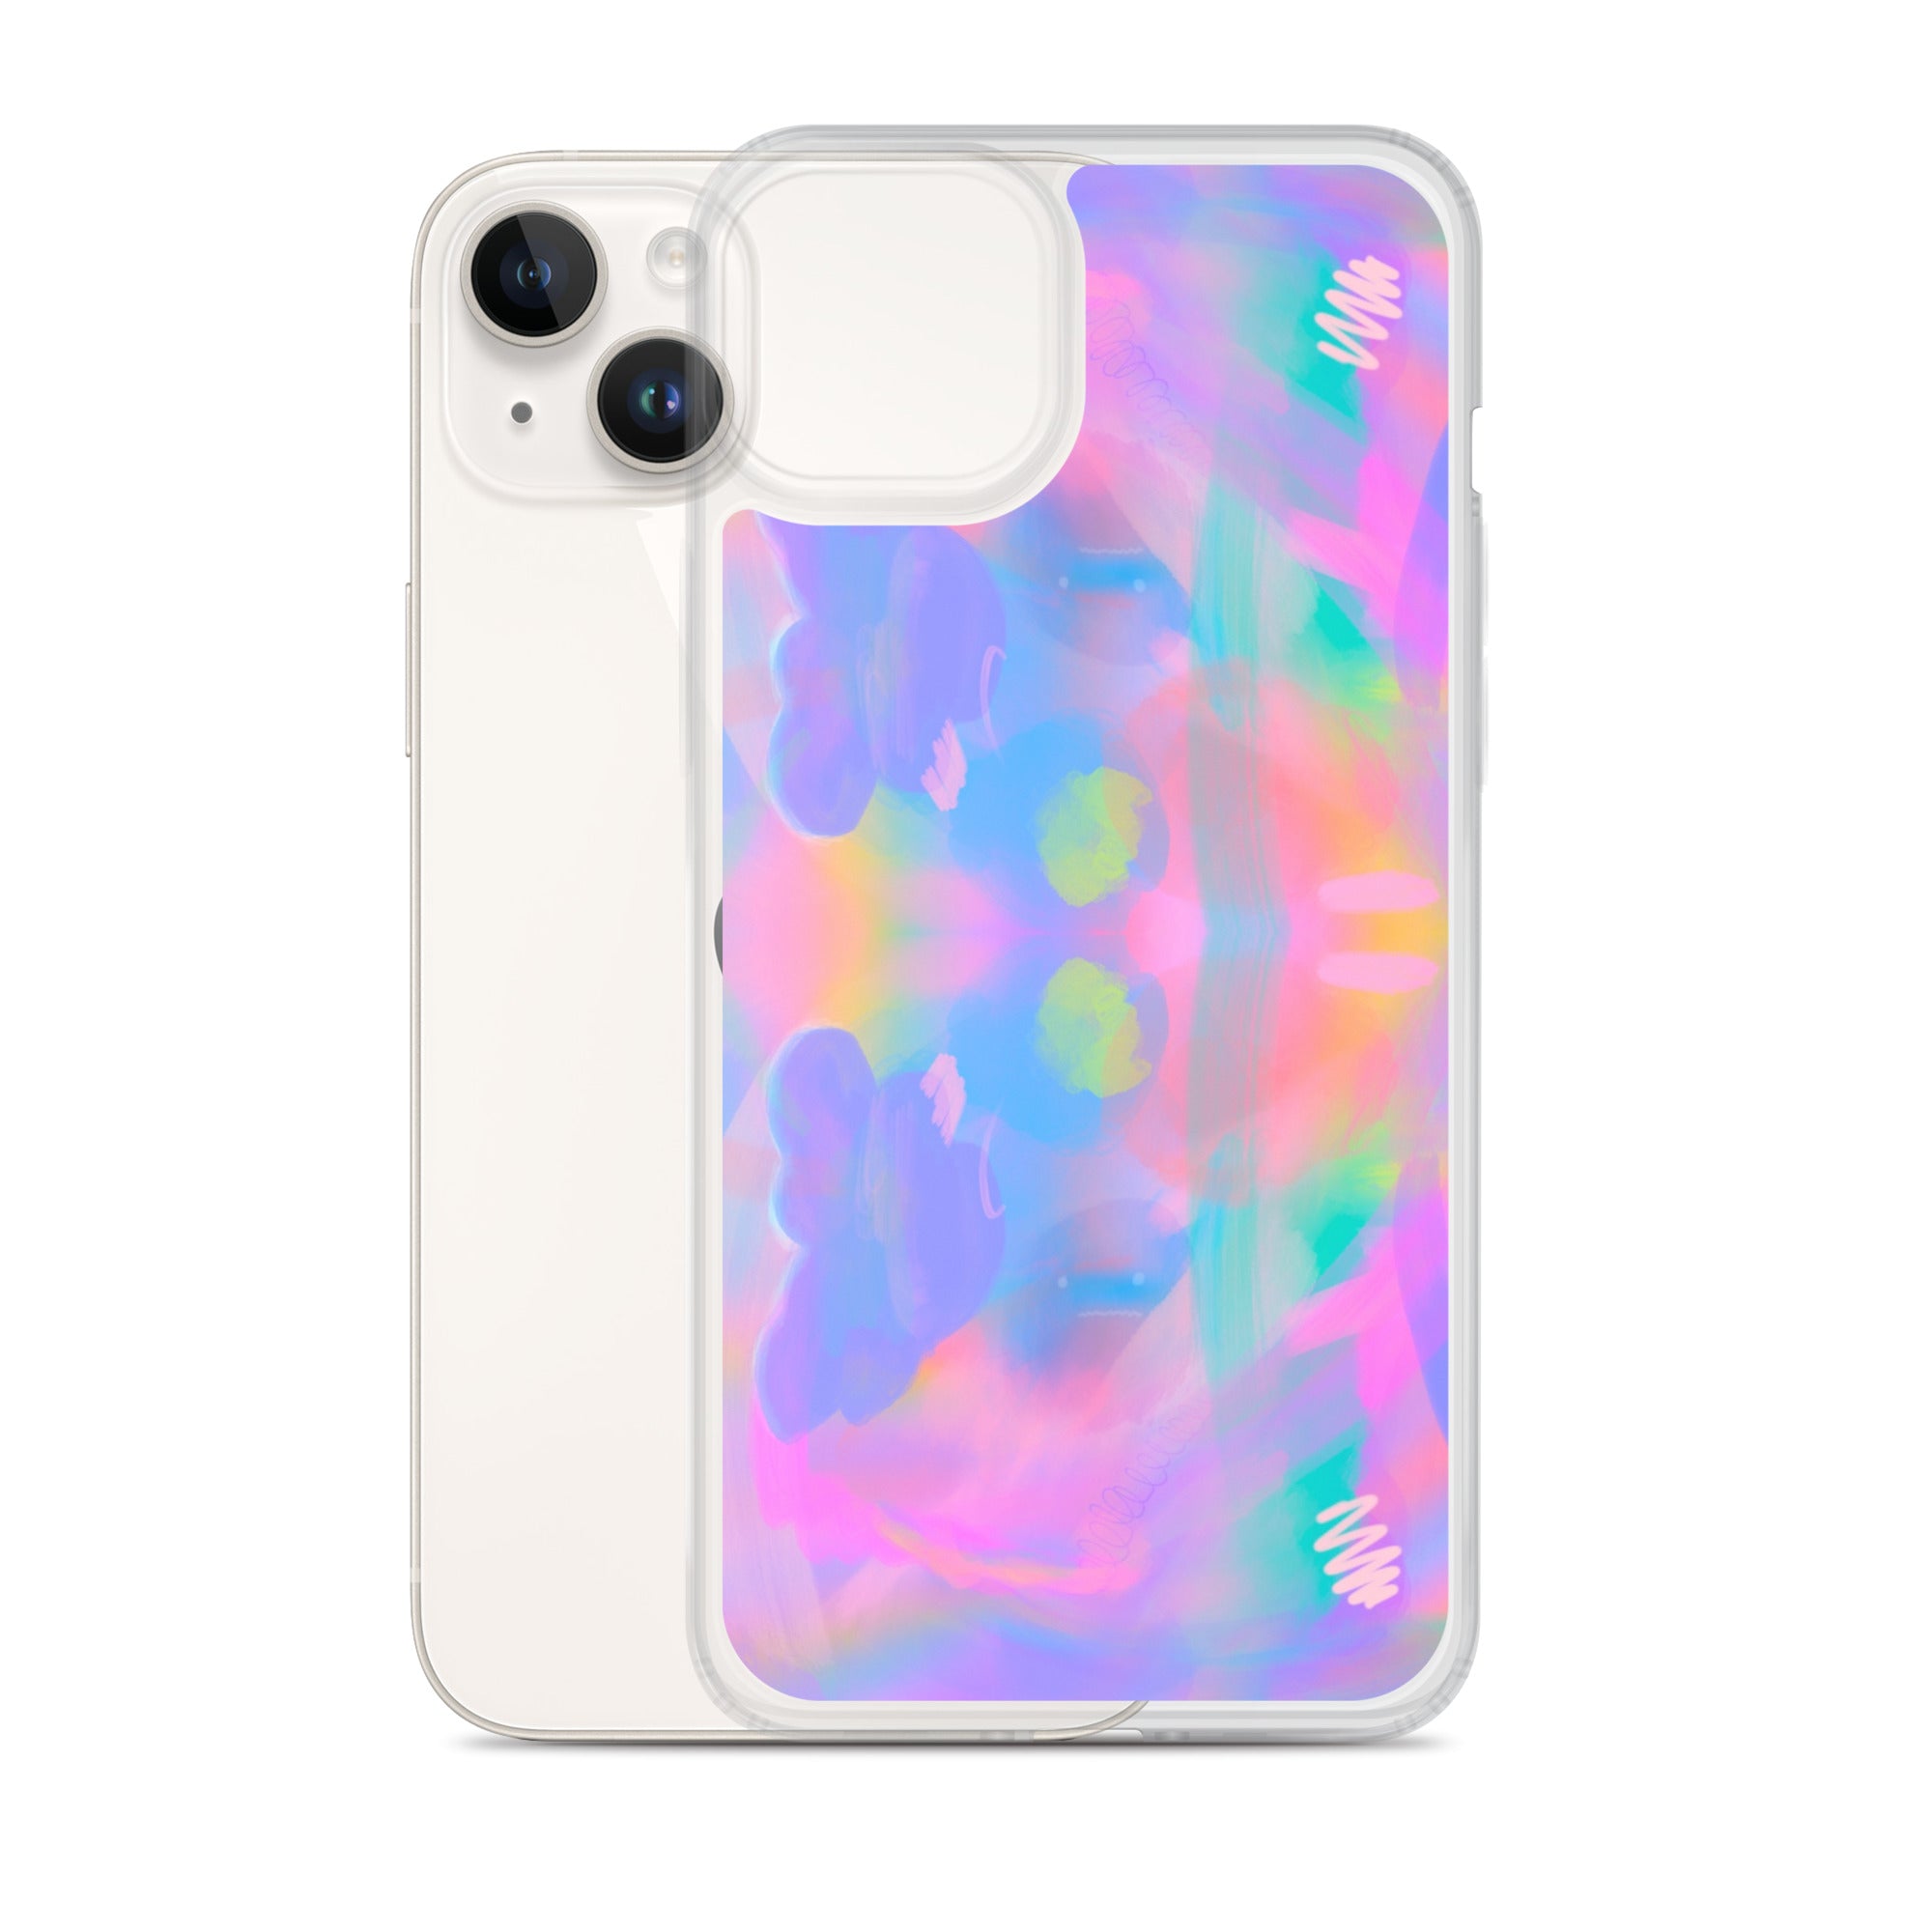 Trauma is a Ghost iPhone Case